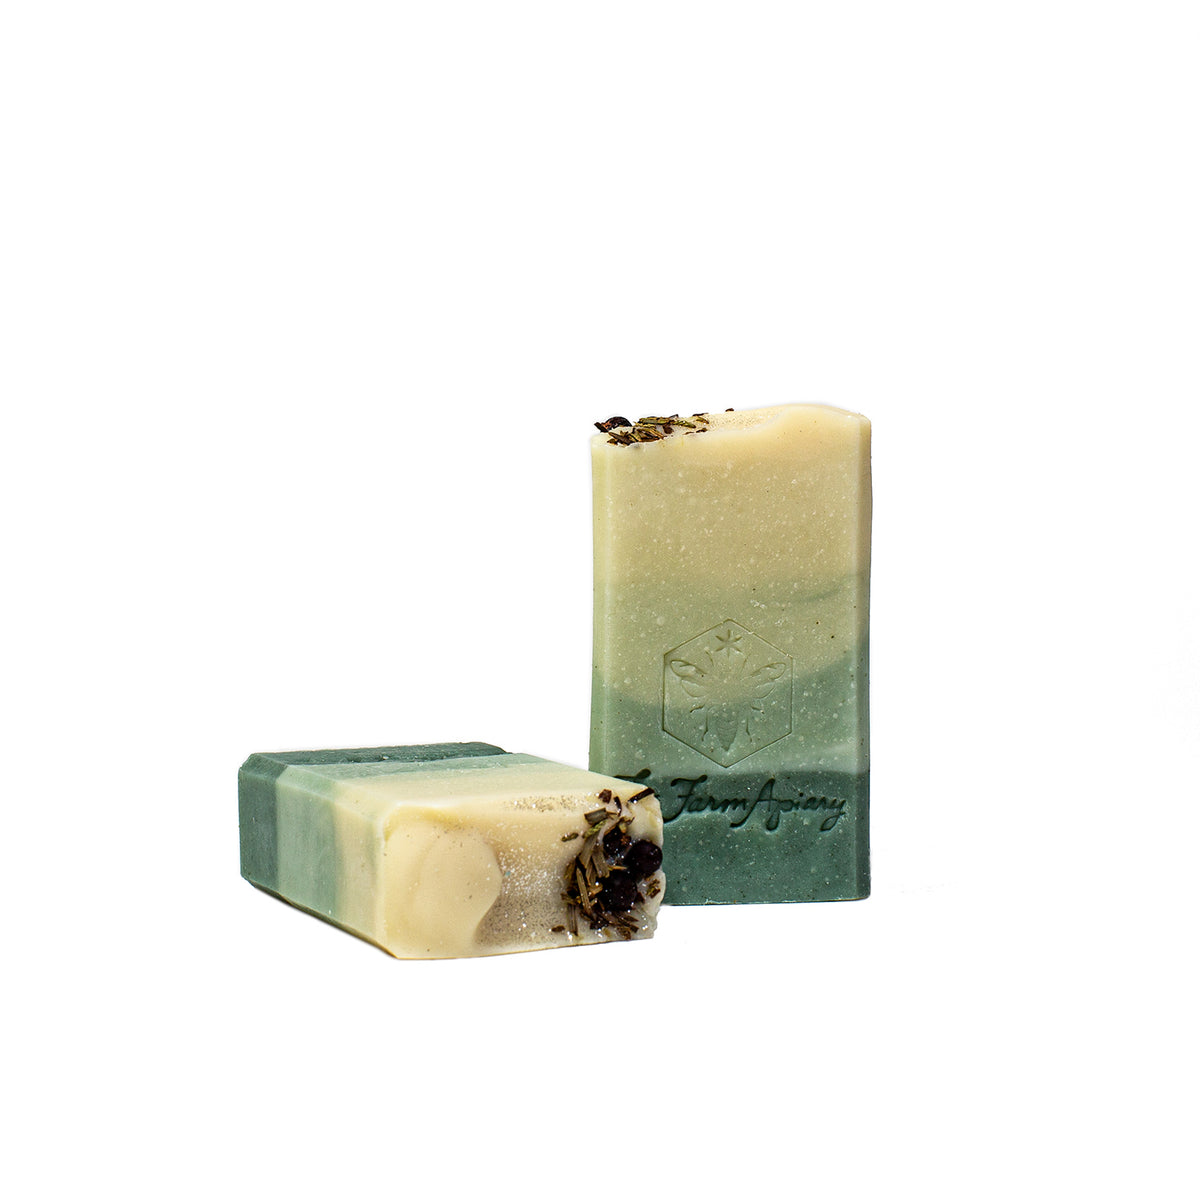 Enchanted Forest Soap